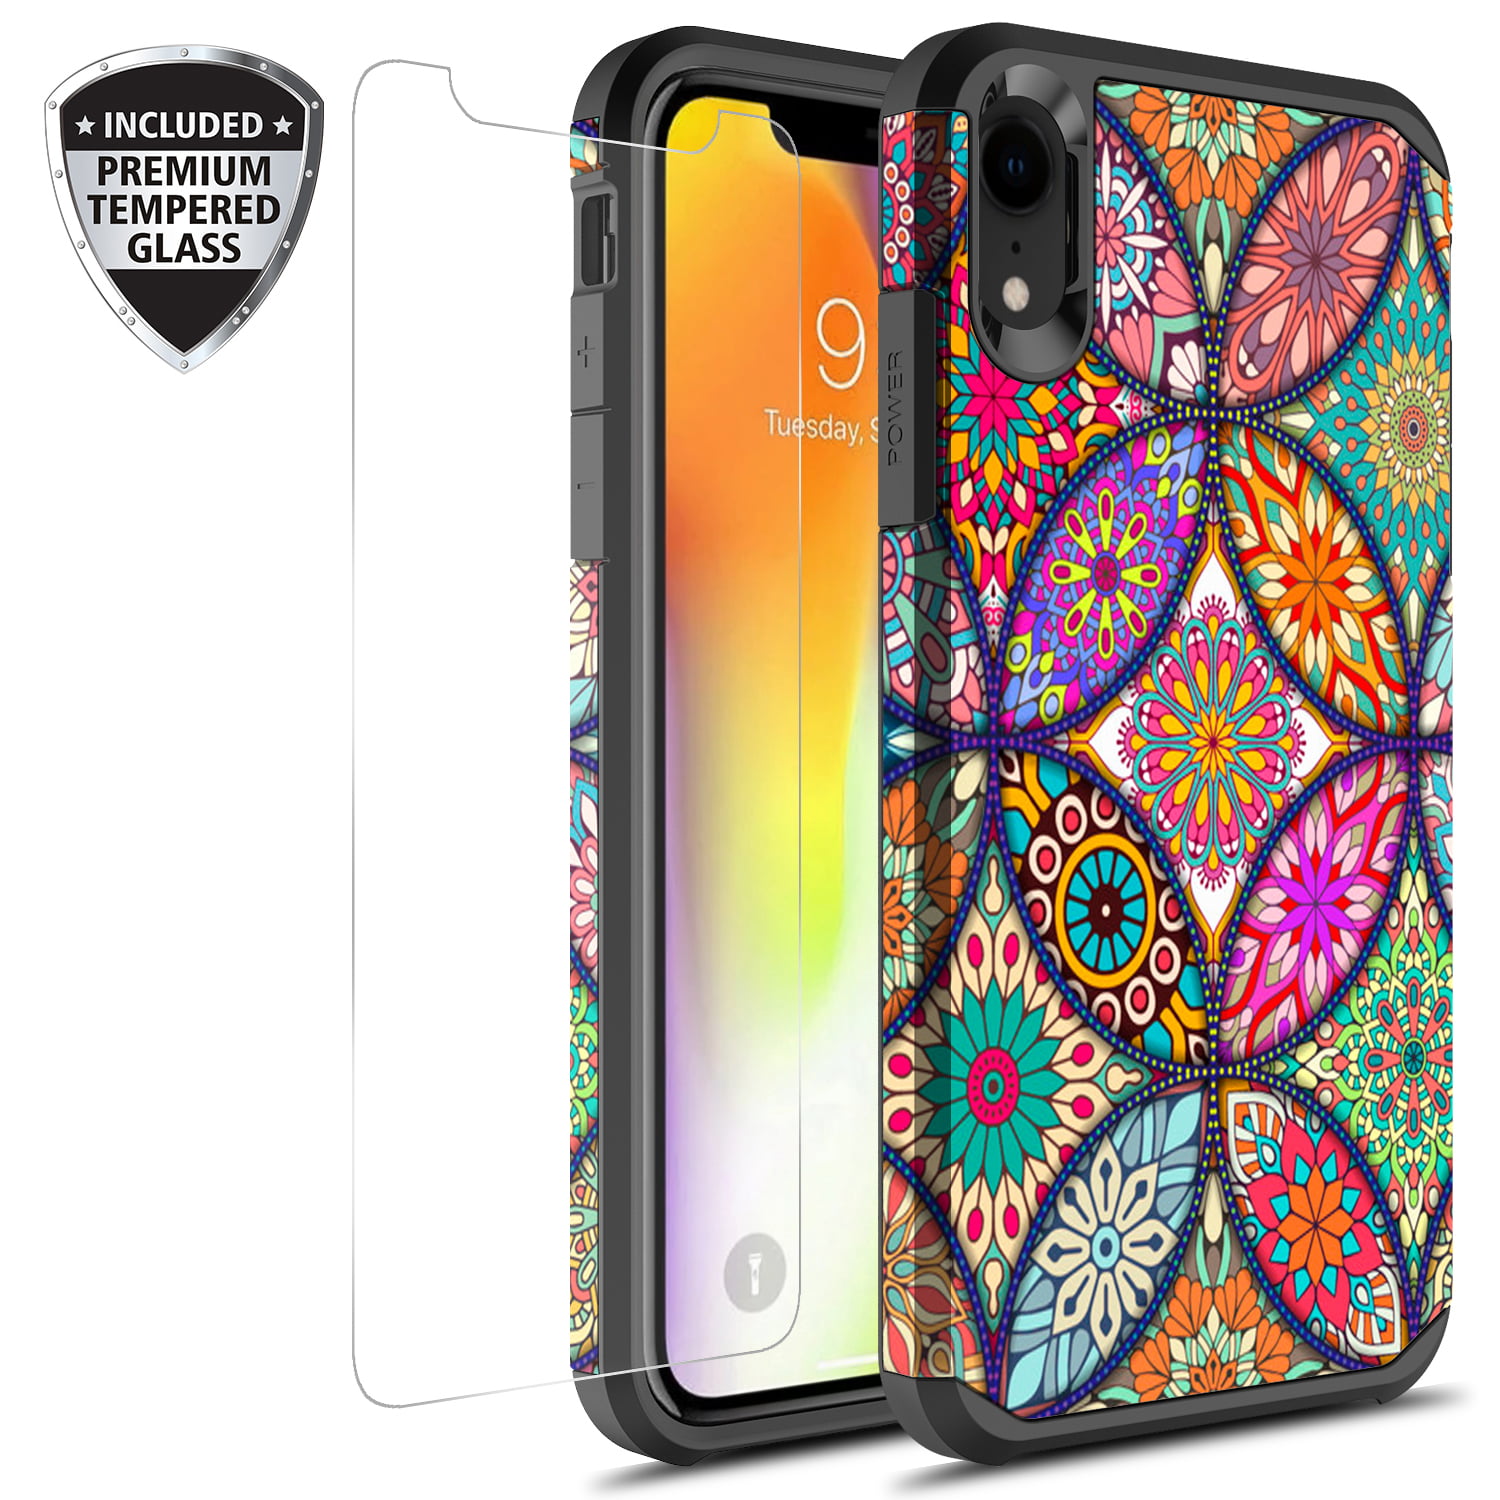 iPhone XR Case With Tempered Glass Screen Protector, Kaesar Slim Hybrid Dual Layer Graphic Fashion Colorful Cover Armor Case for Apple iPhone XR (Colorful Mandala)